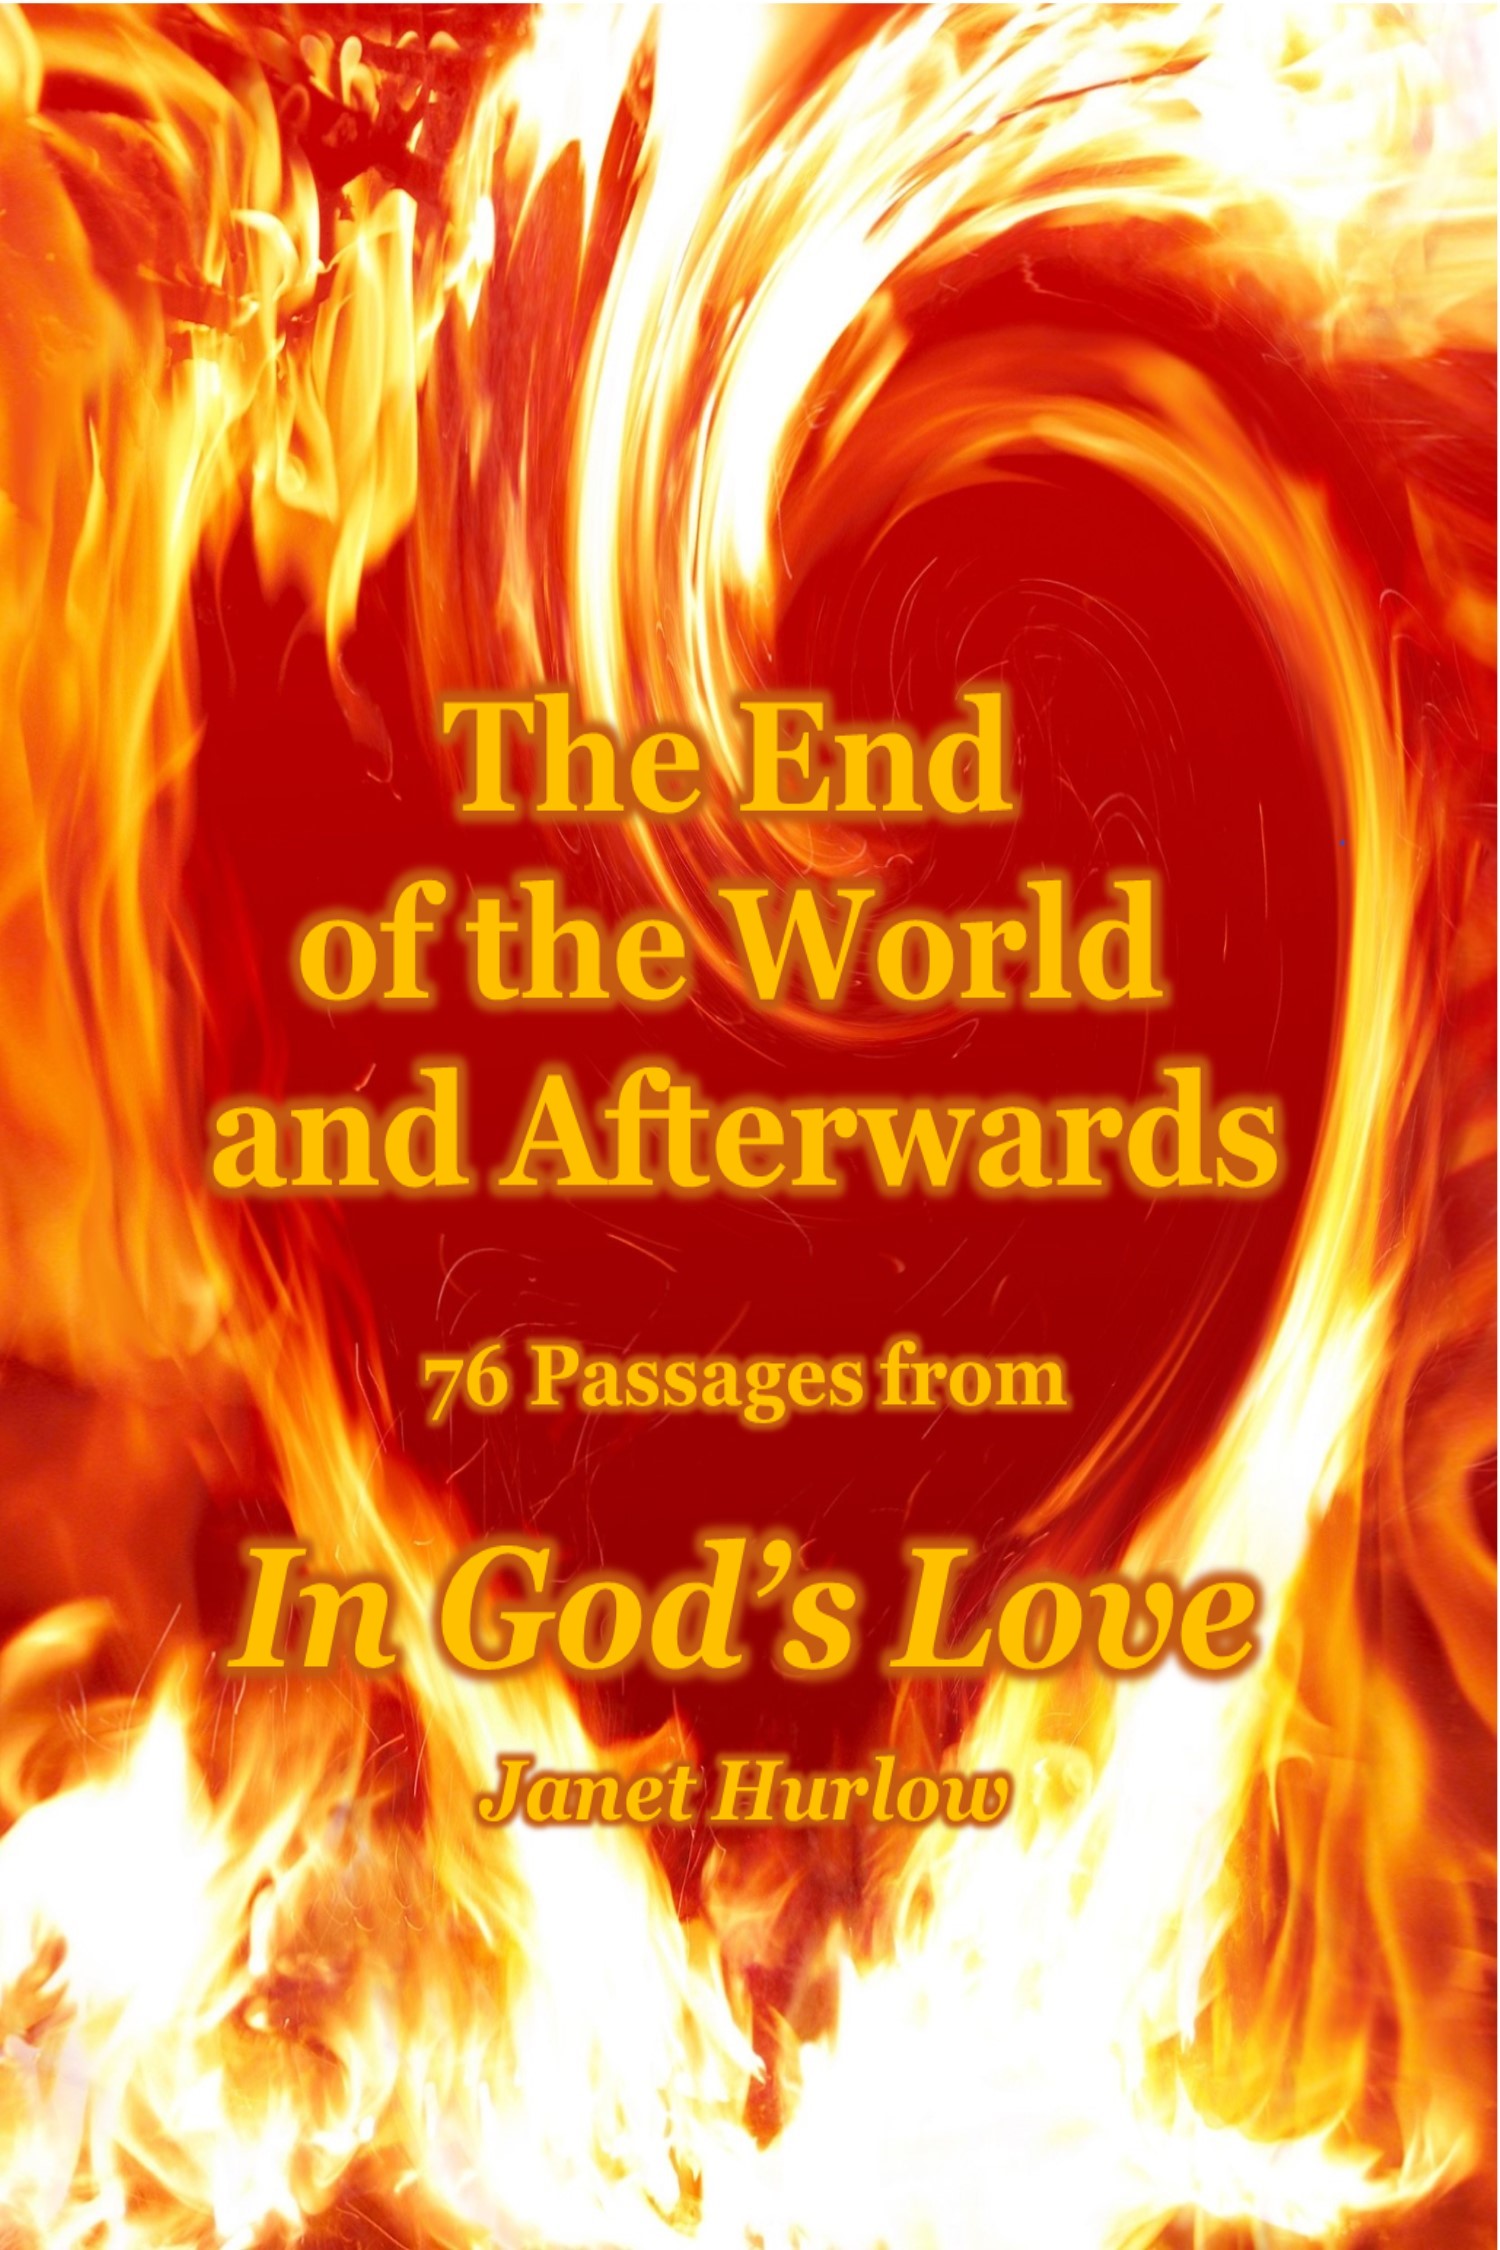 front book image title The End of the World and Afterwards 76 Passages from In God's Love writer Janet Hurlow flaming heart abstract